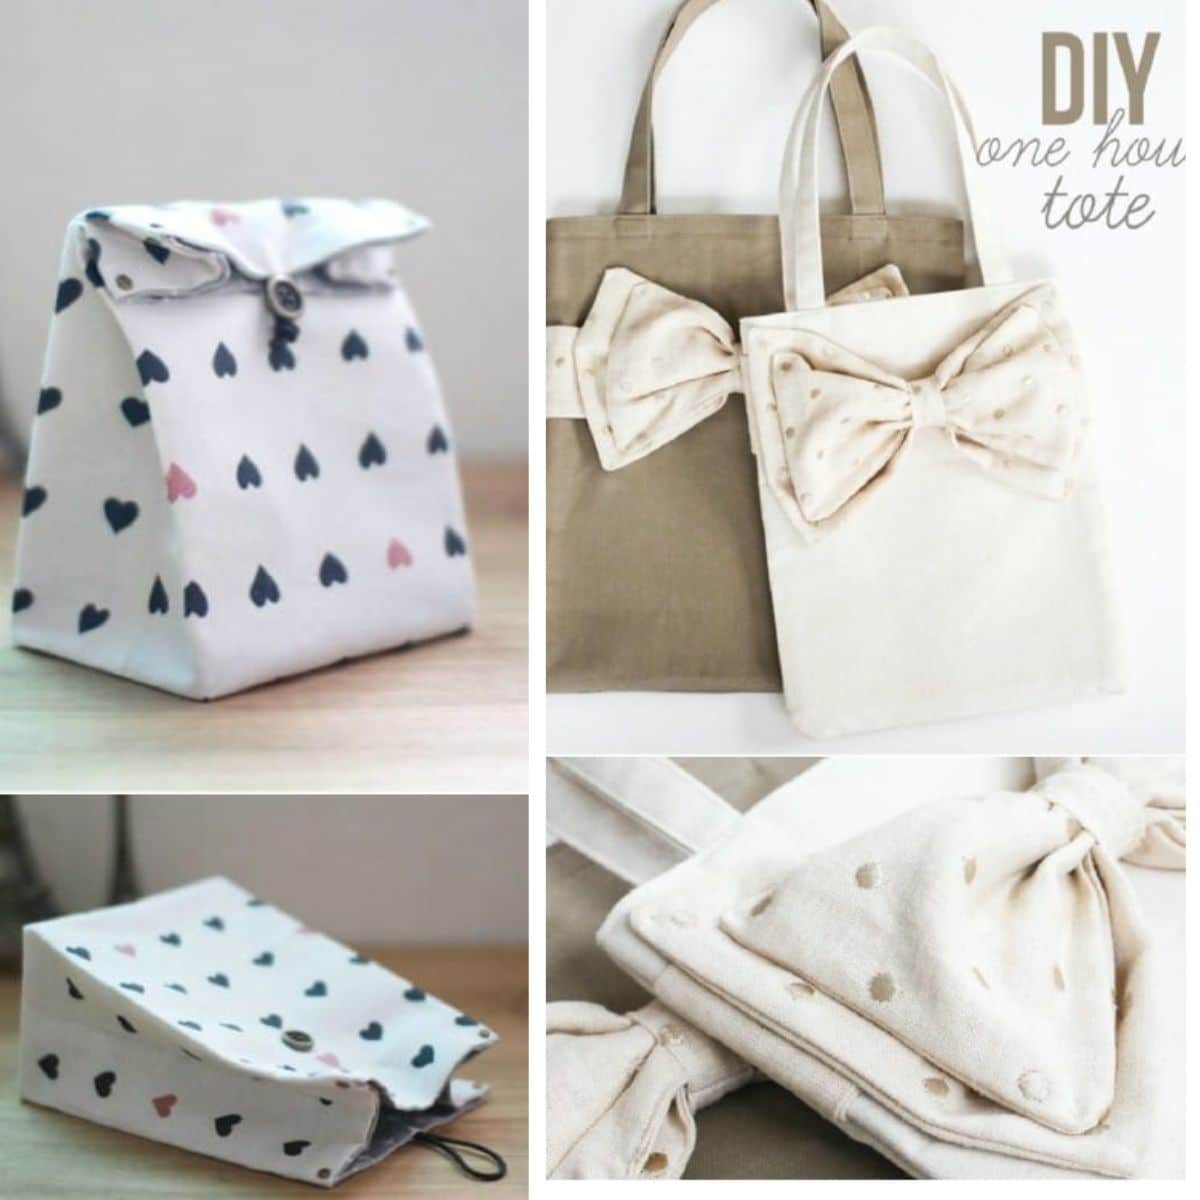 40 quick gifts to sew when you're short of time - Gathered